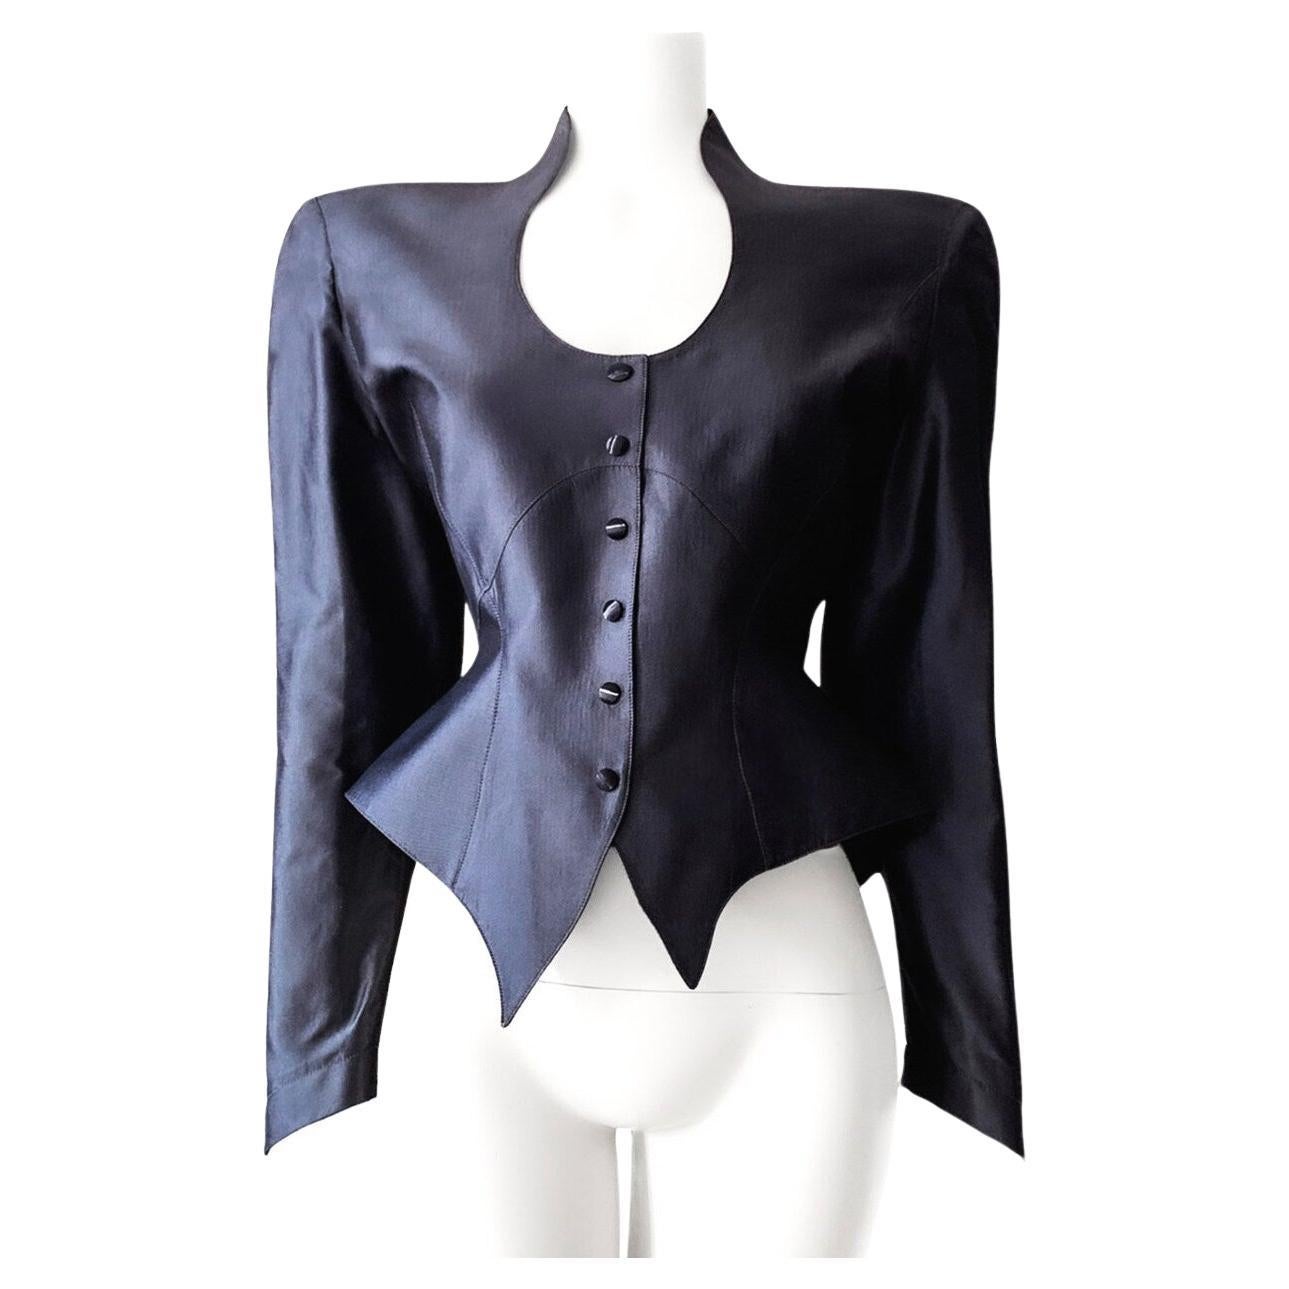 Thierry Mugler Dramatic Sculputral Silk Skirtsuit Jacket Skirt Suit For Sale